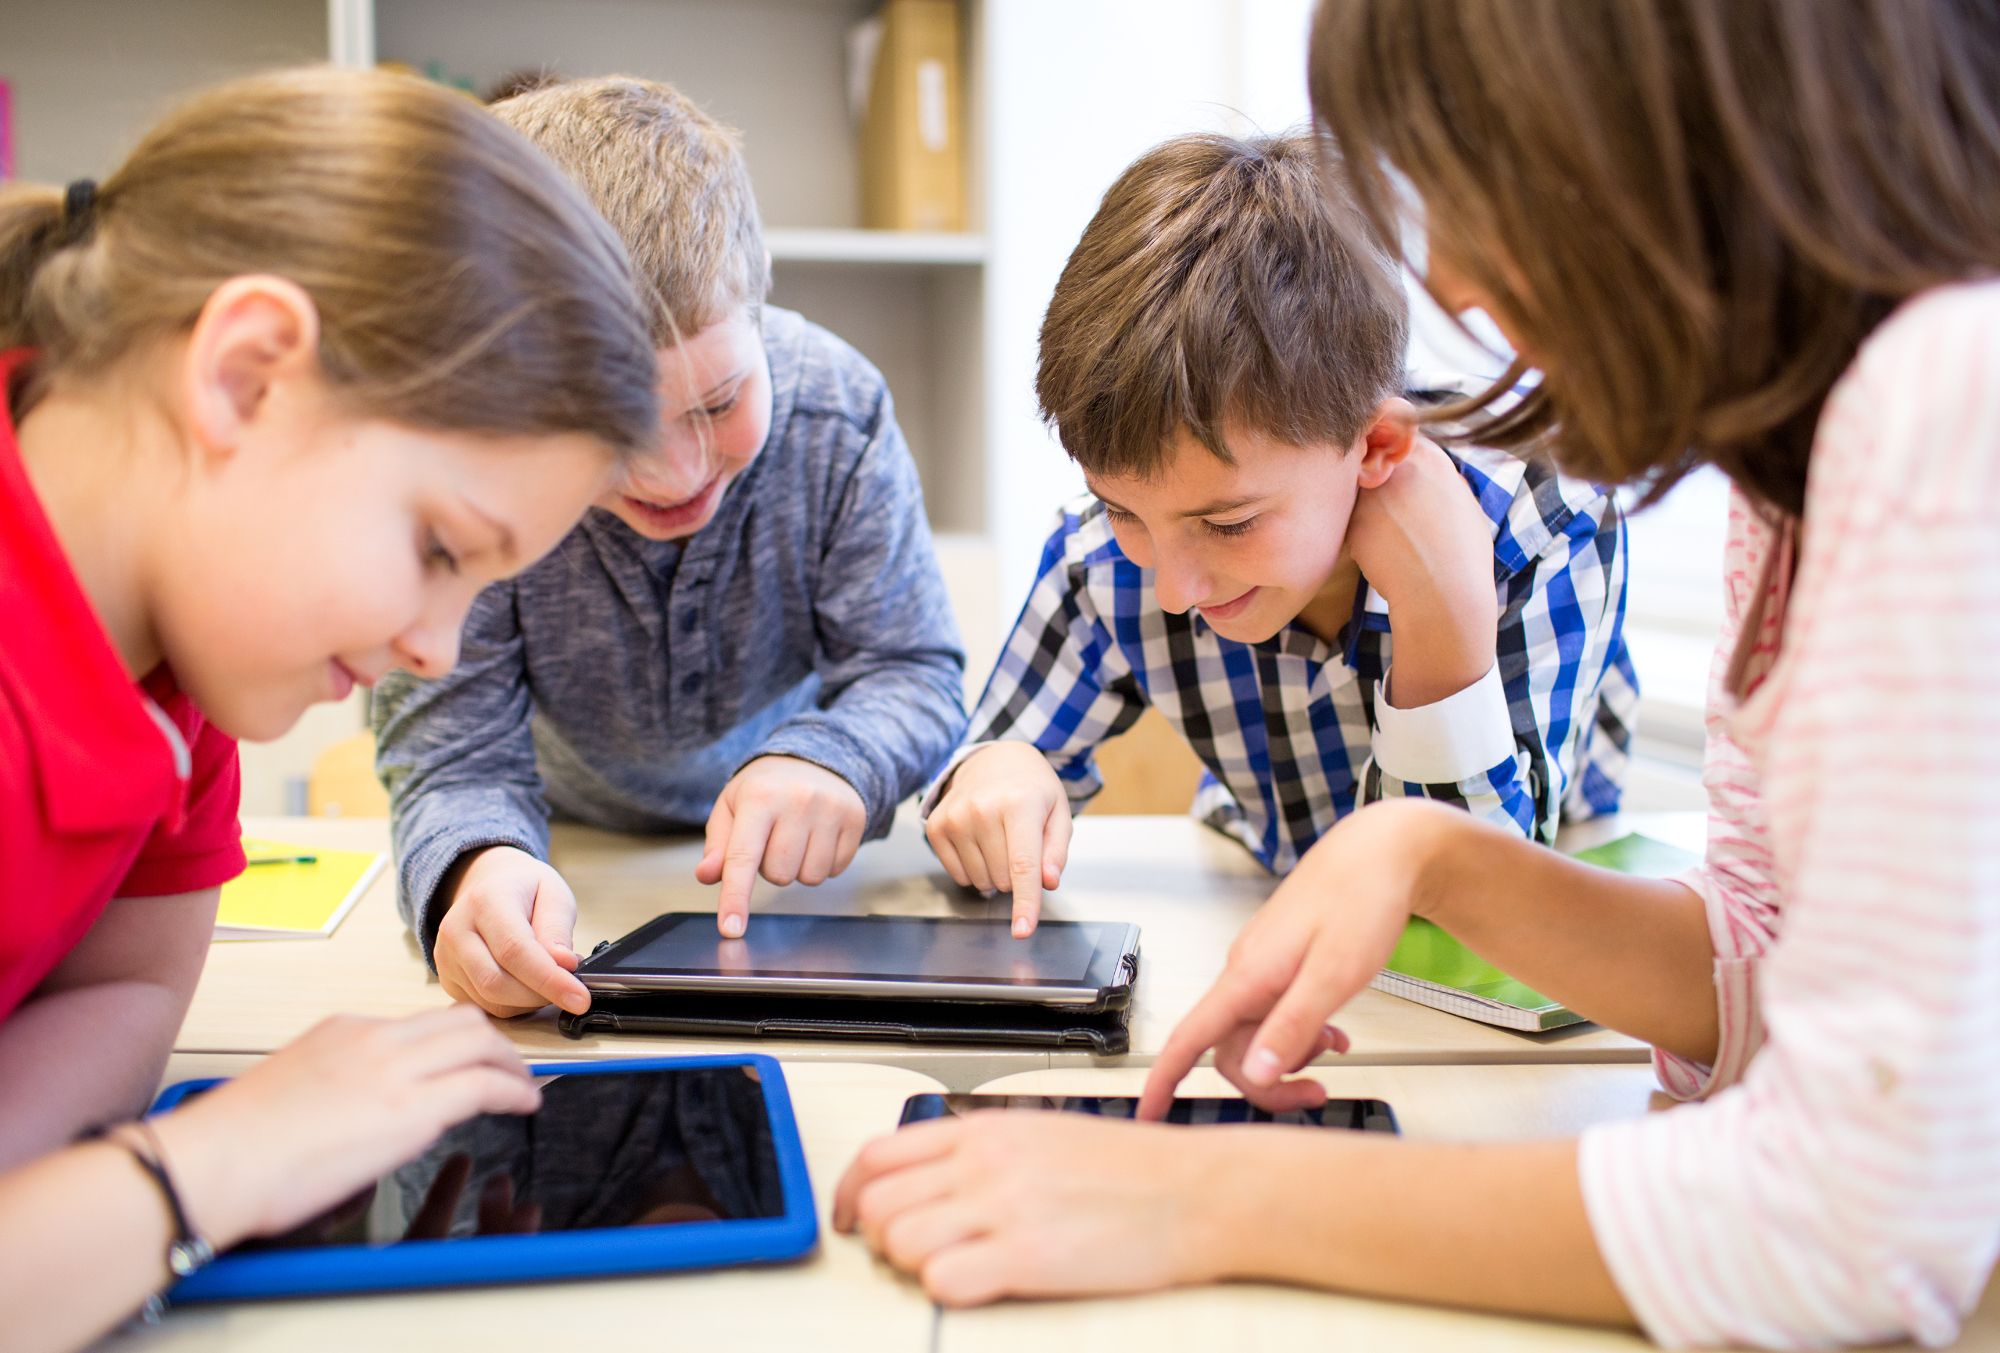 group of young kids playing on ipads and tablets